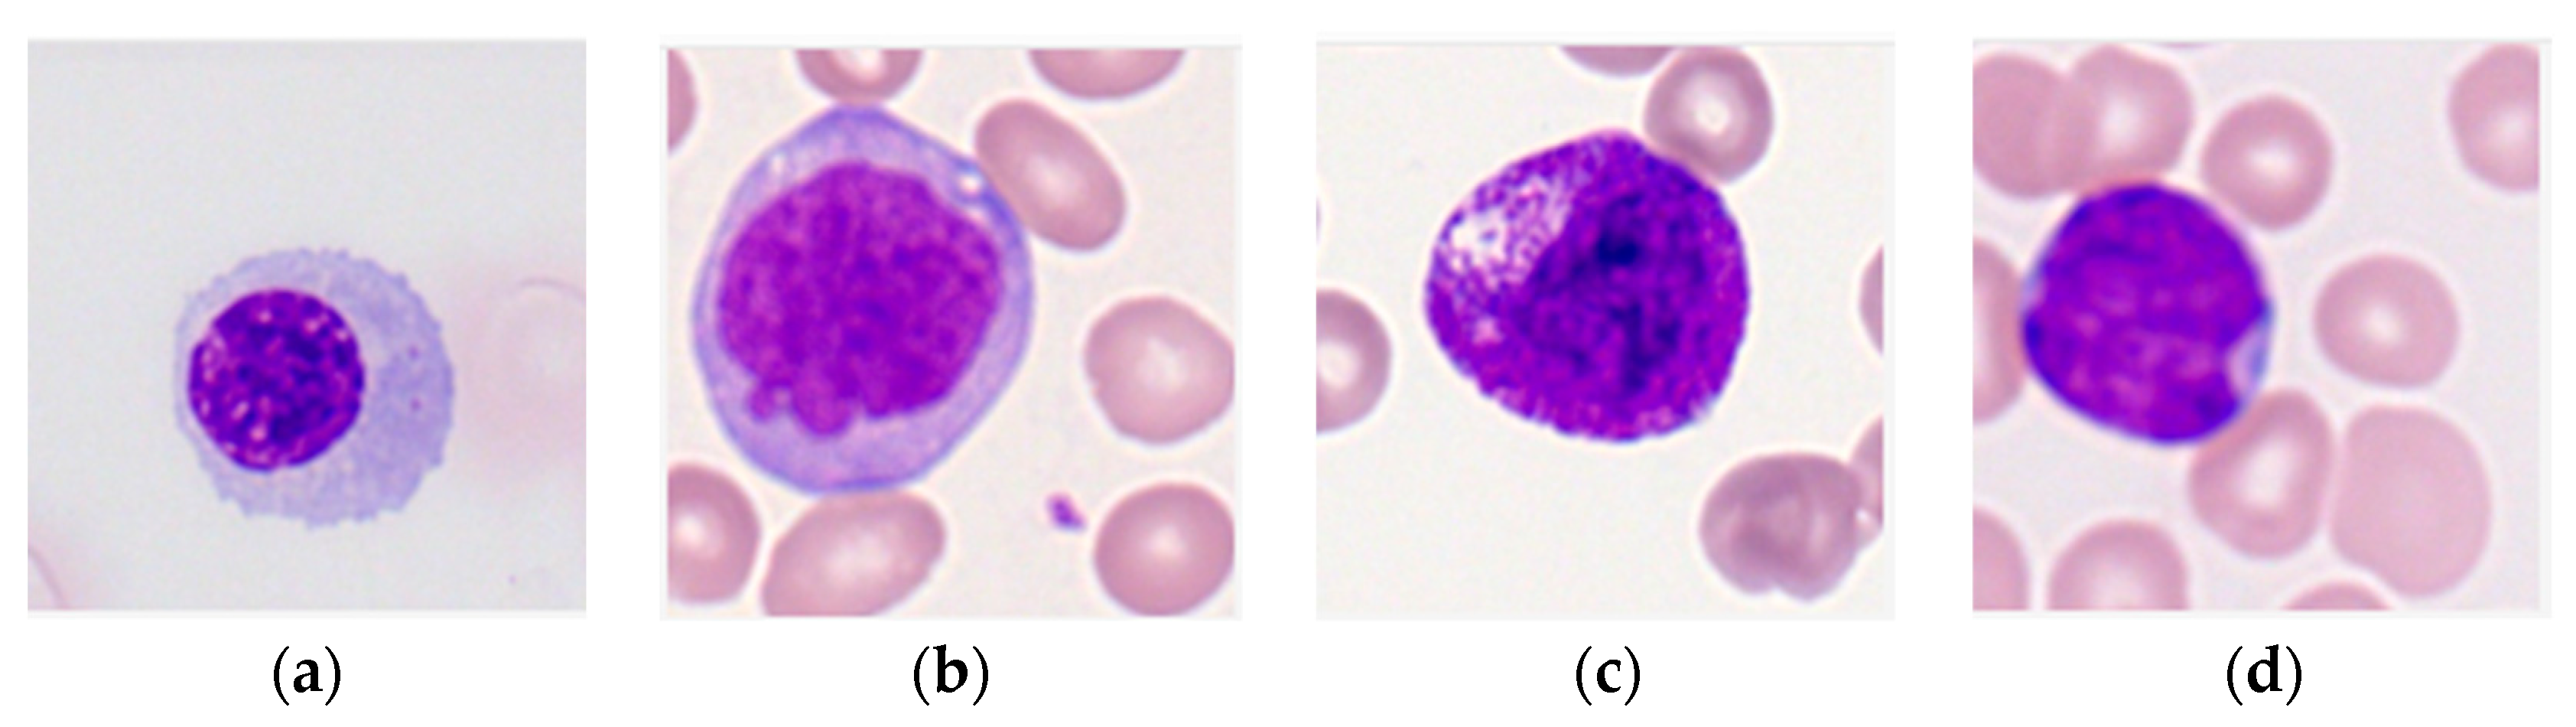 Bioengineering | Free Full-Text | Detection and Classification of Immature  Leukocytes for Diagnosis of Acute Myeloid Leukemia Using Random Forest  Algorithm | HTML